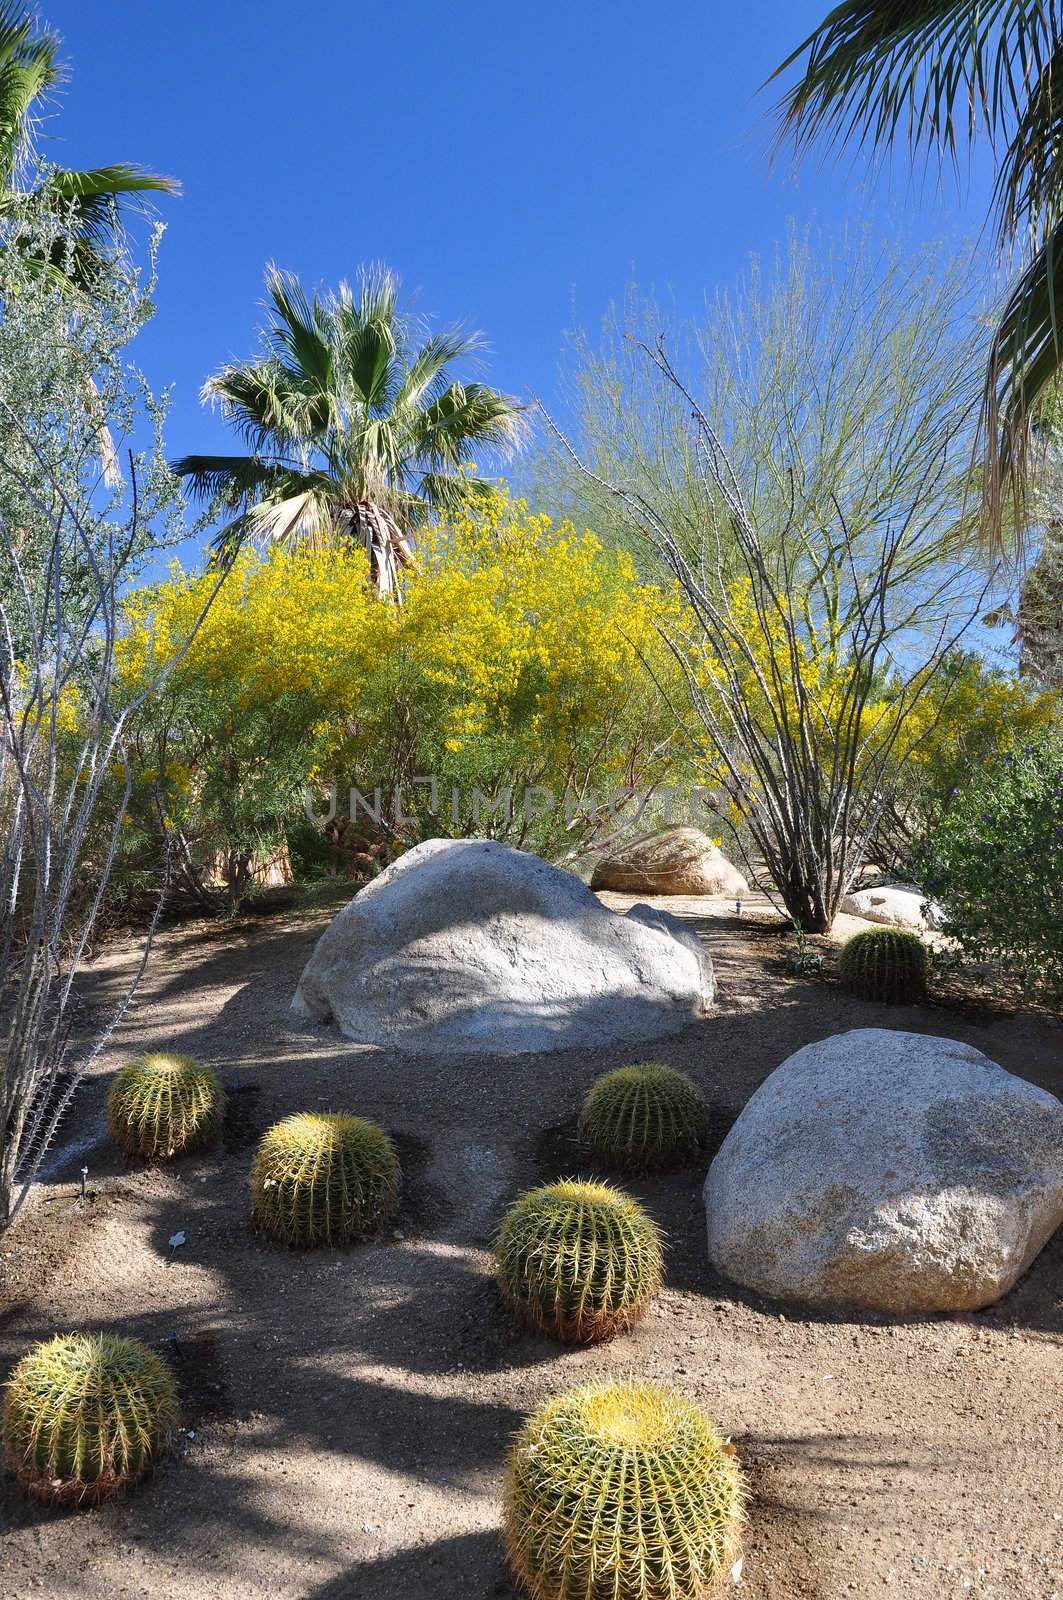 Cactus mixes with colorful desert shrubs on this hillside in Palm Desert, California.